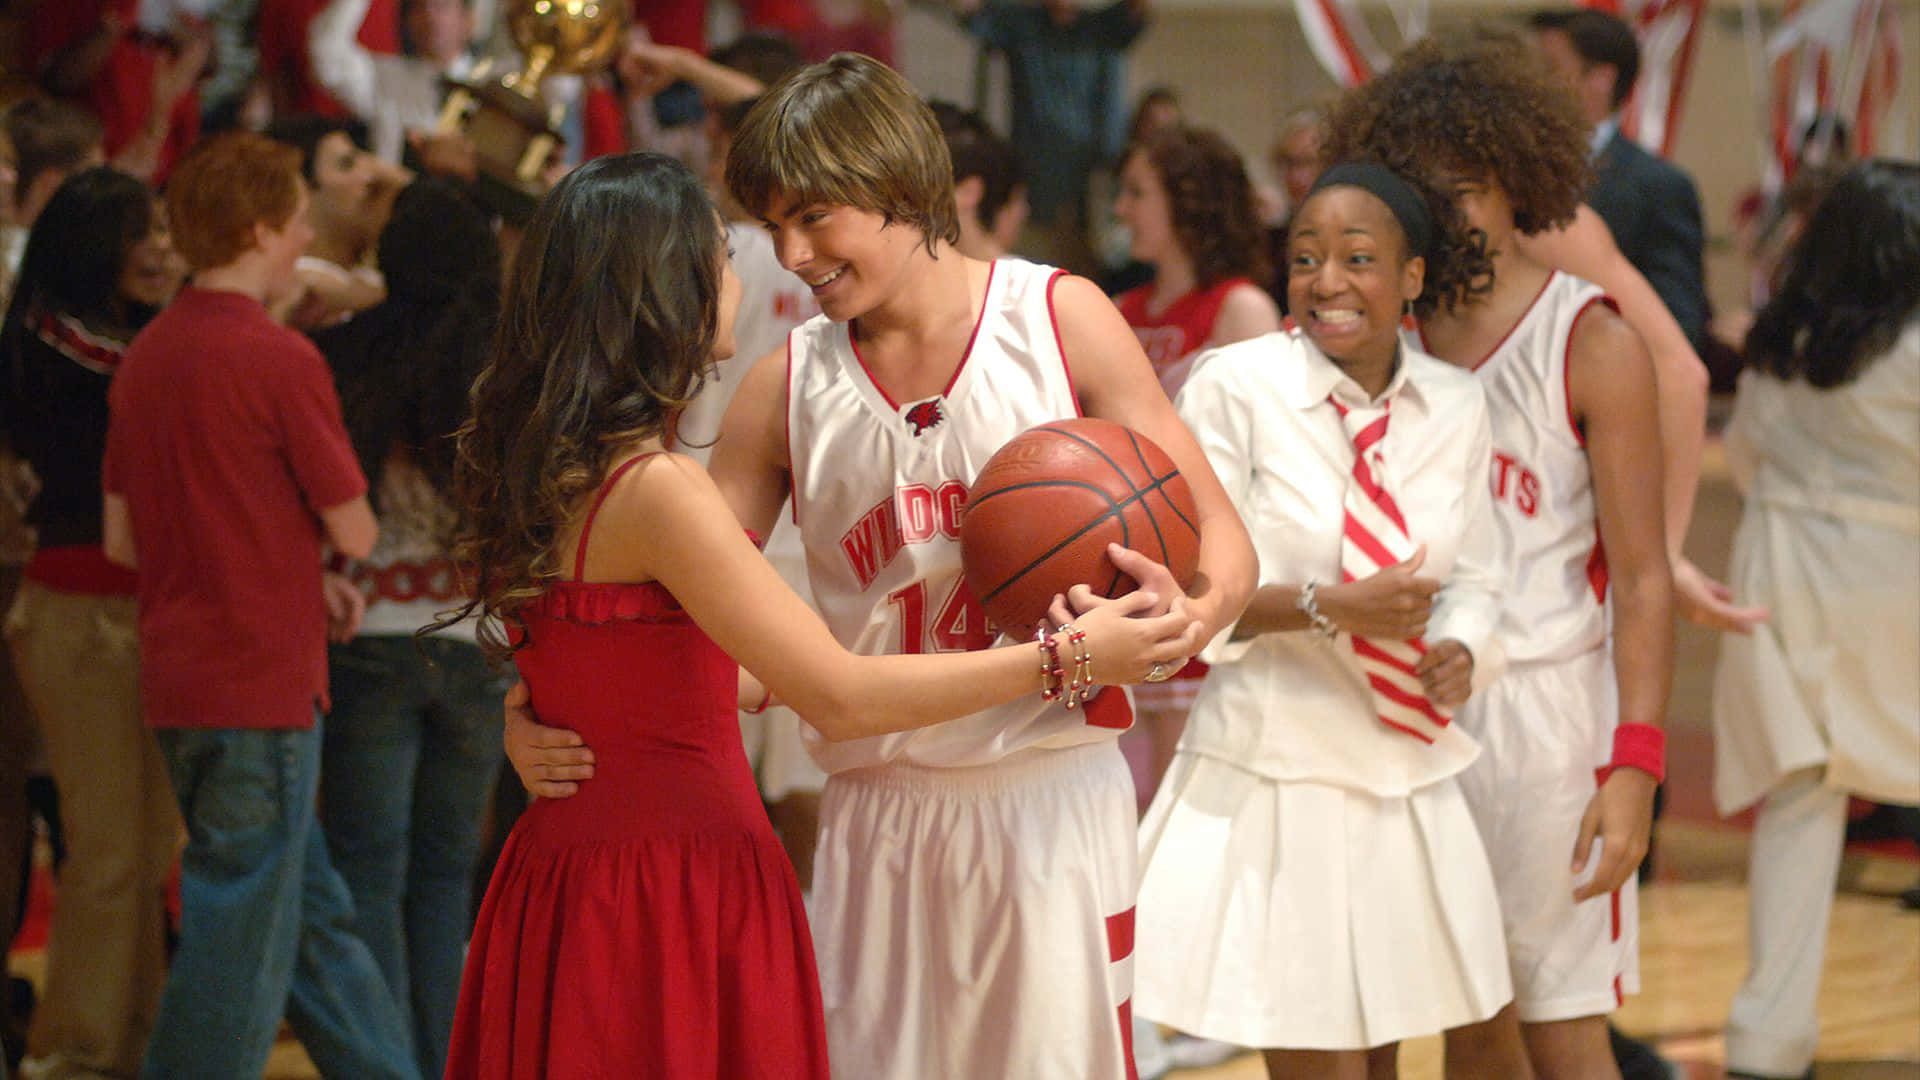 High School Musical cast members unite in song and dance